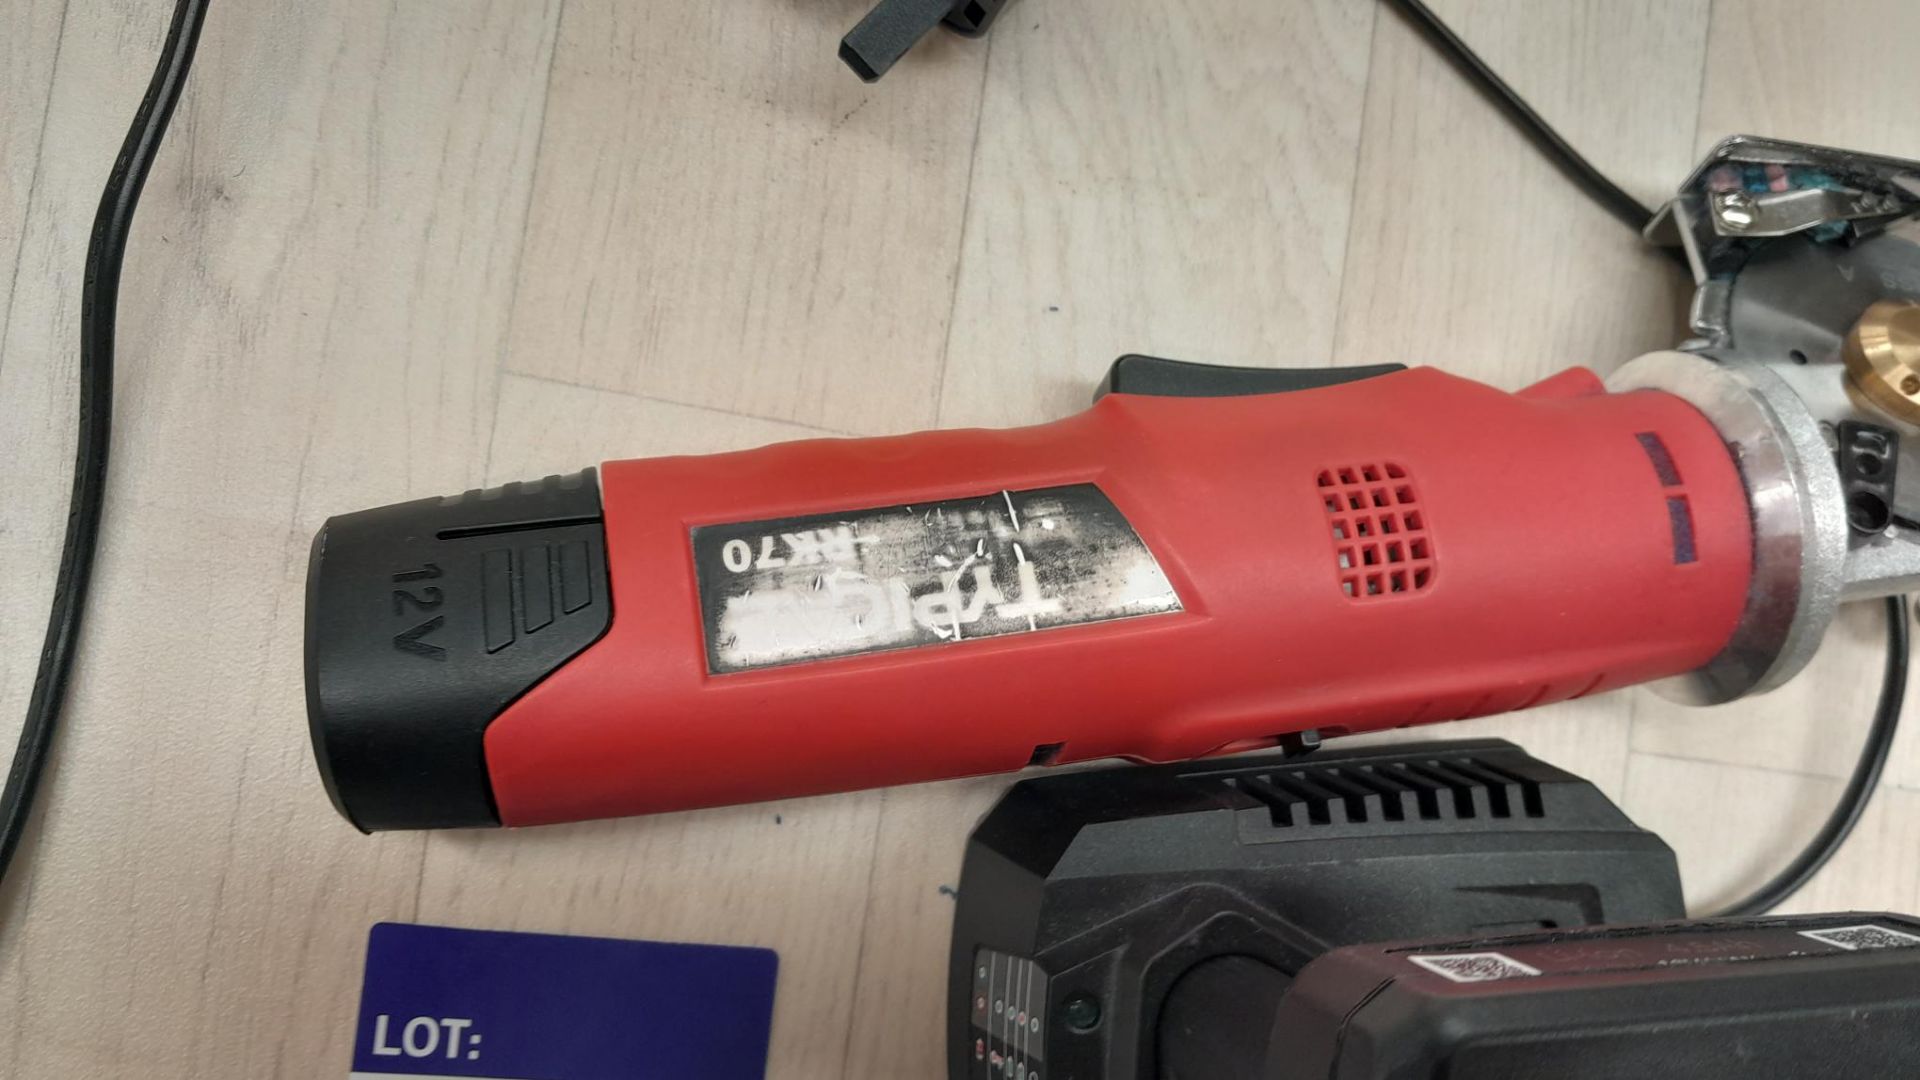 Typical TY-RK70 Battery Hand Cutter Serial Number RK70200911361 with charger and spare battery ( - Image 2 of 2